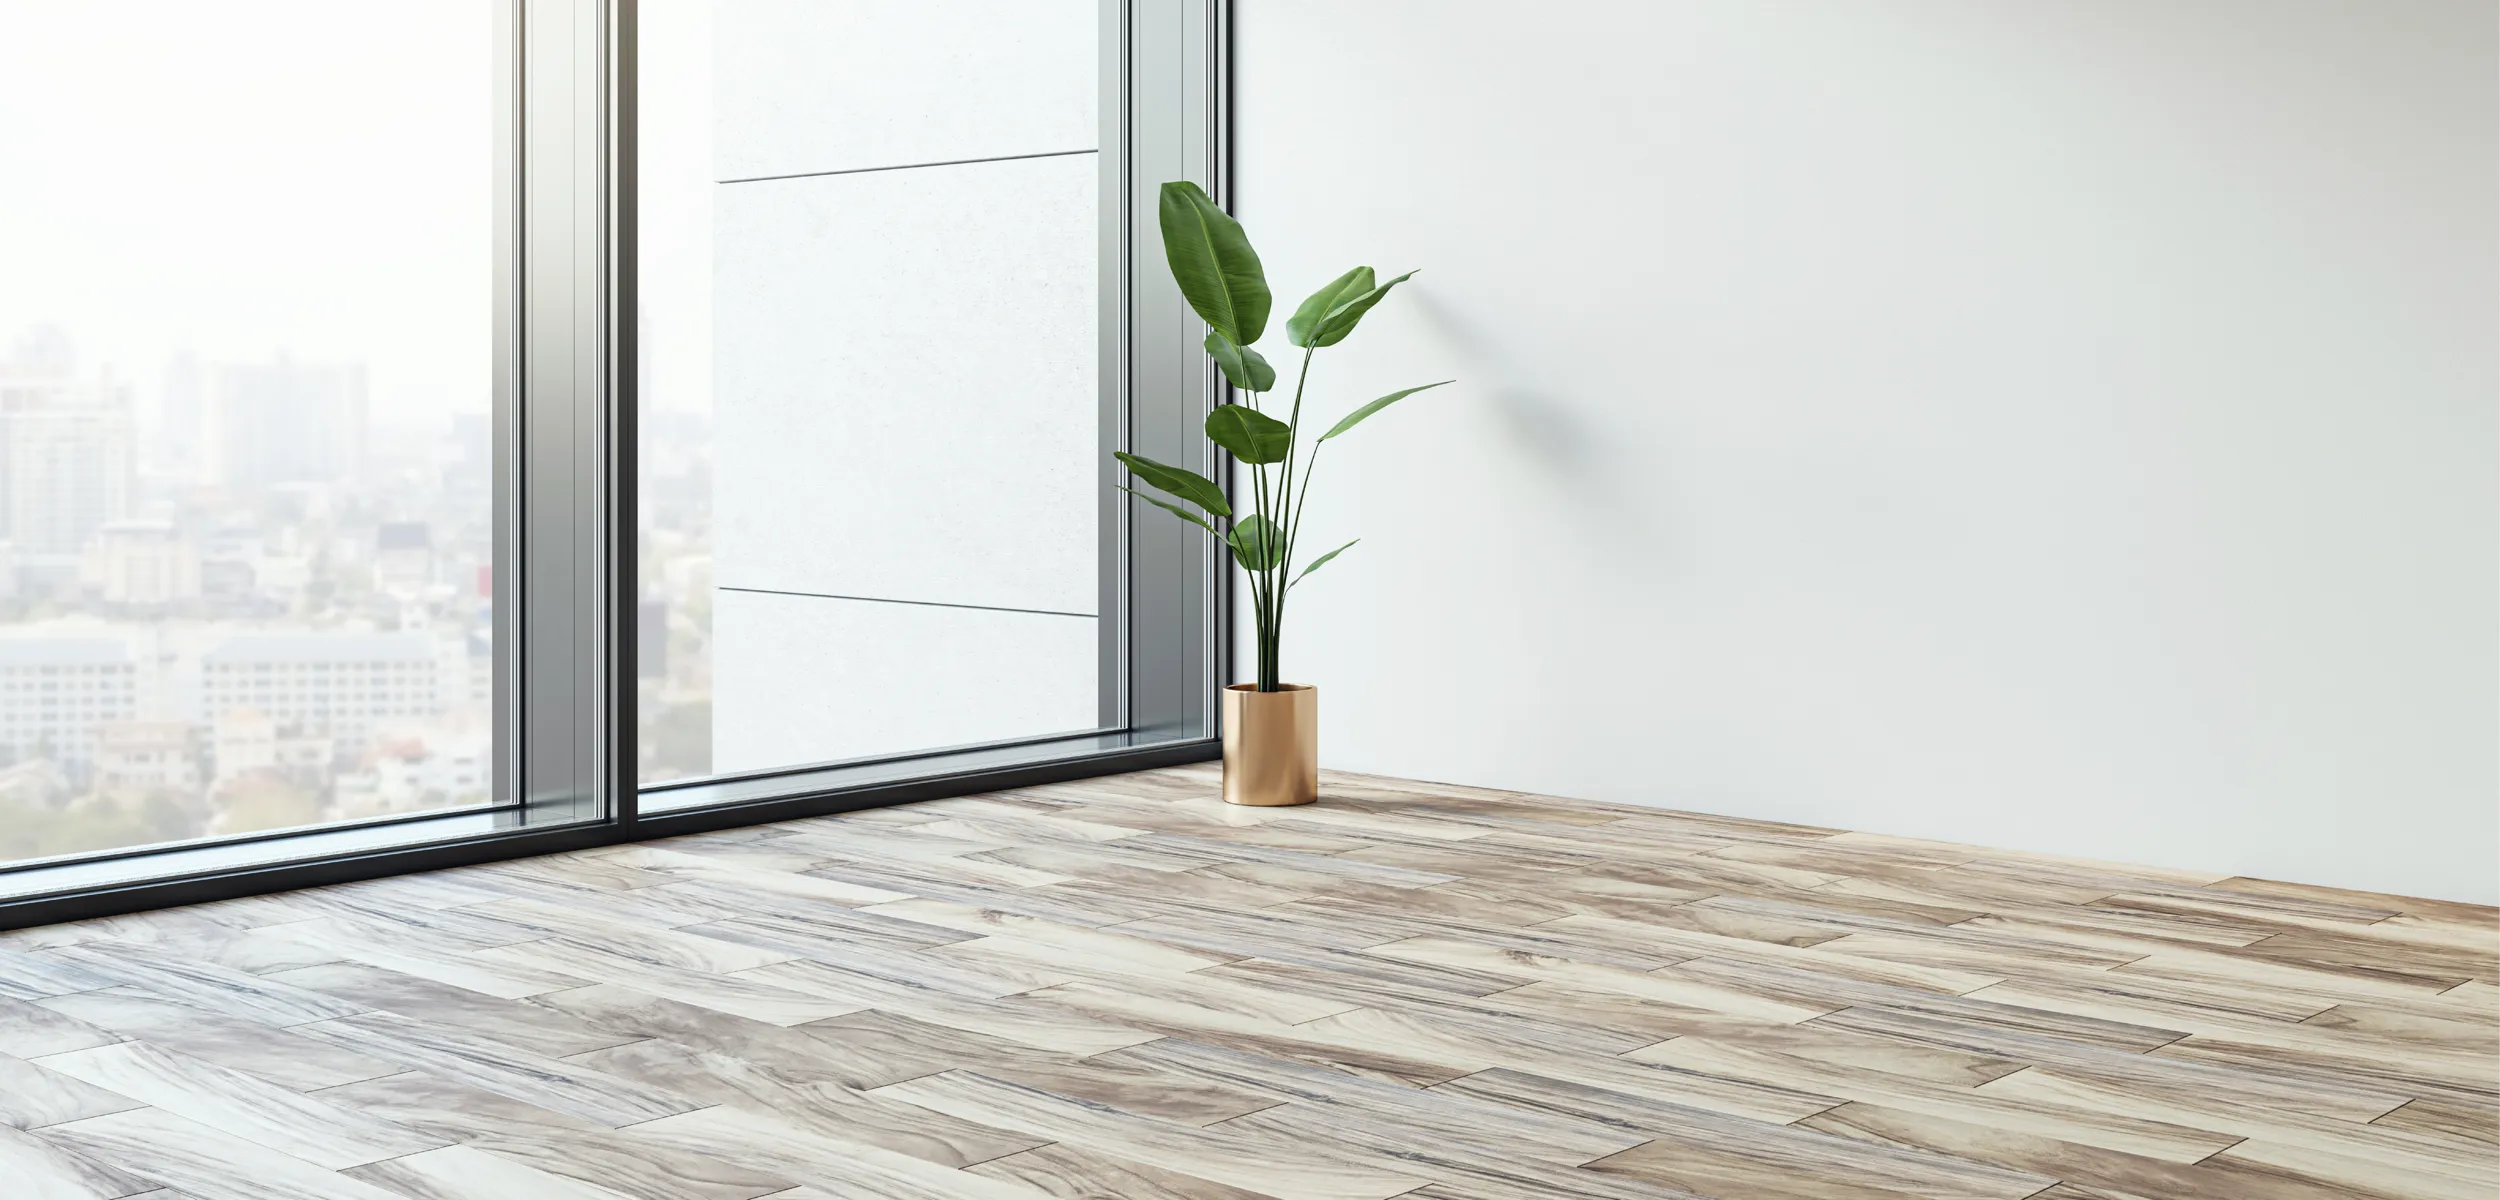 Empty apartment home with luxury vinyl flooring, a plant, and a view of the city.